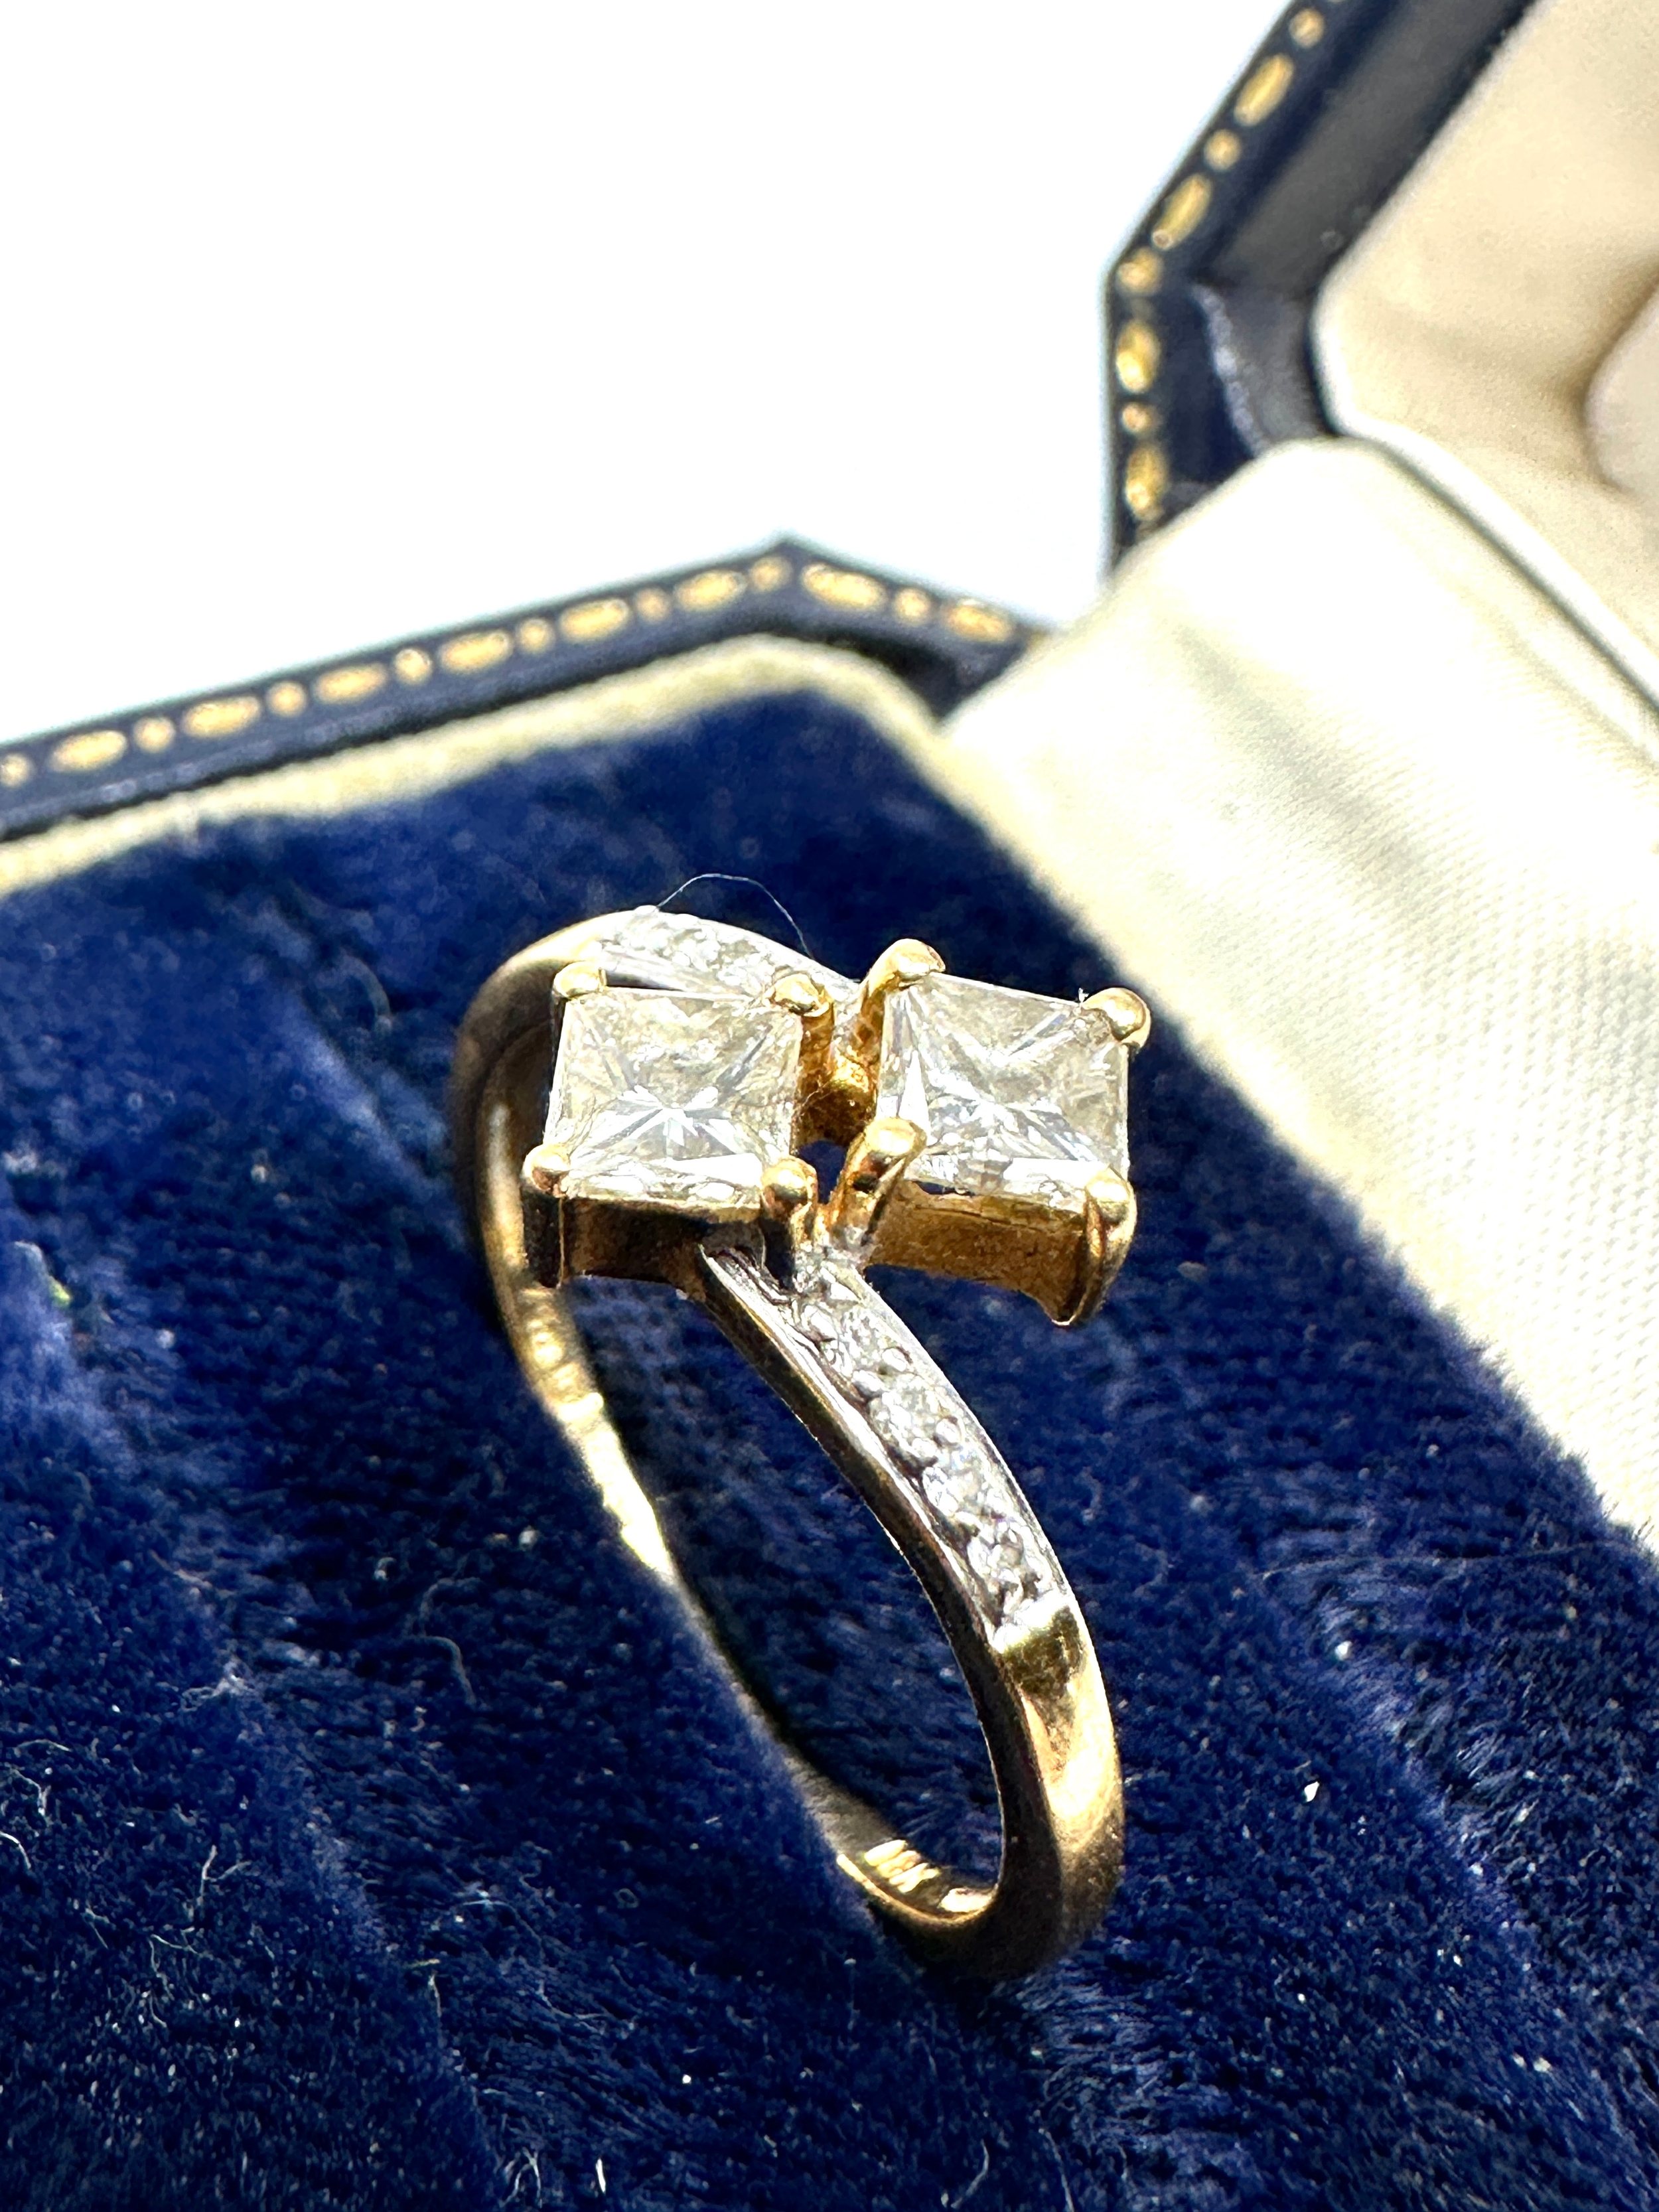 18ct gold 2 square cut diamond with diamond shoulders est 0.60 pt diamonds weight of ring 2.1g - Image 3 of 4